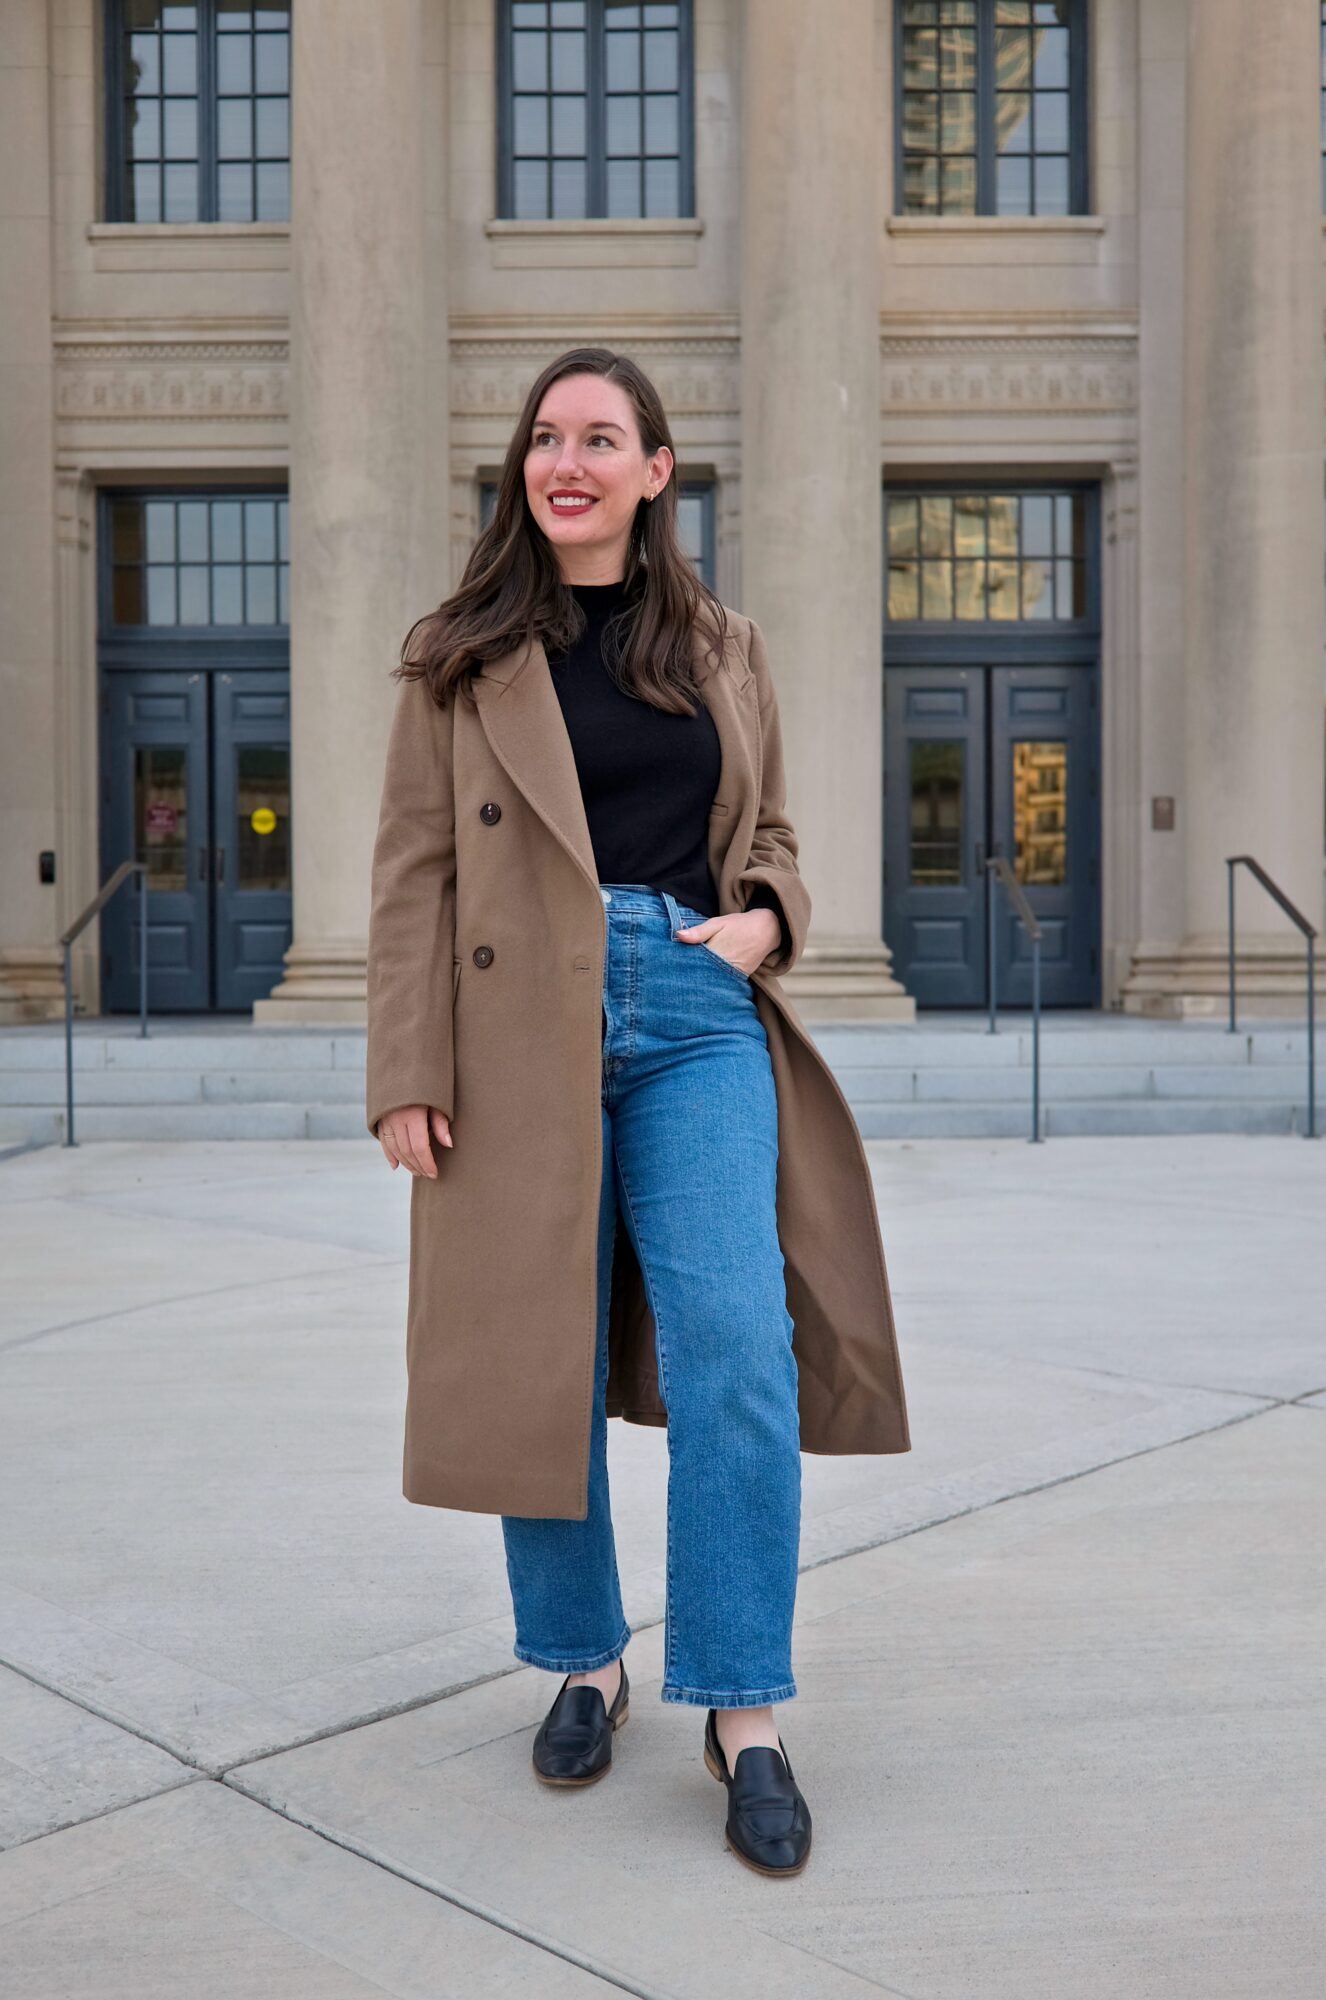 Alyssa wears the Italian Wool Double-Breasted Coat with jeans and a black top